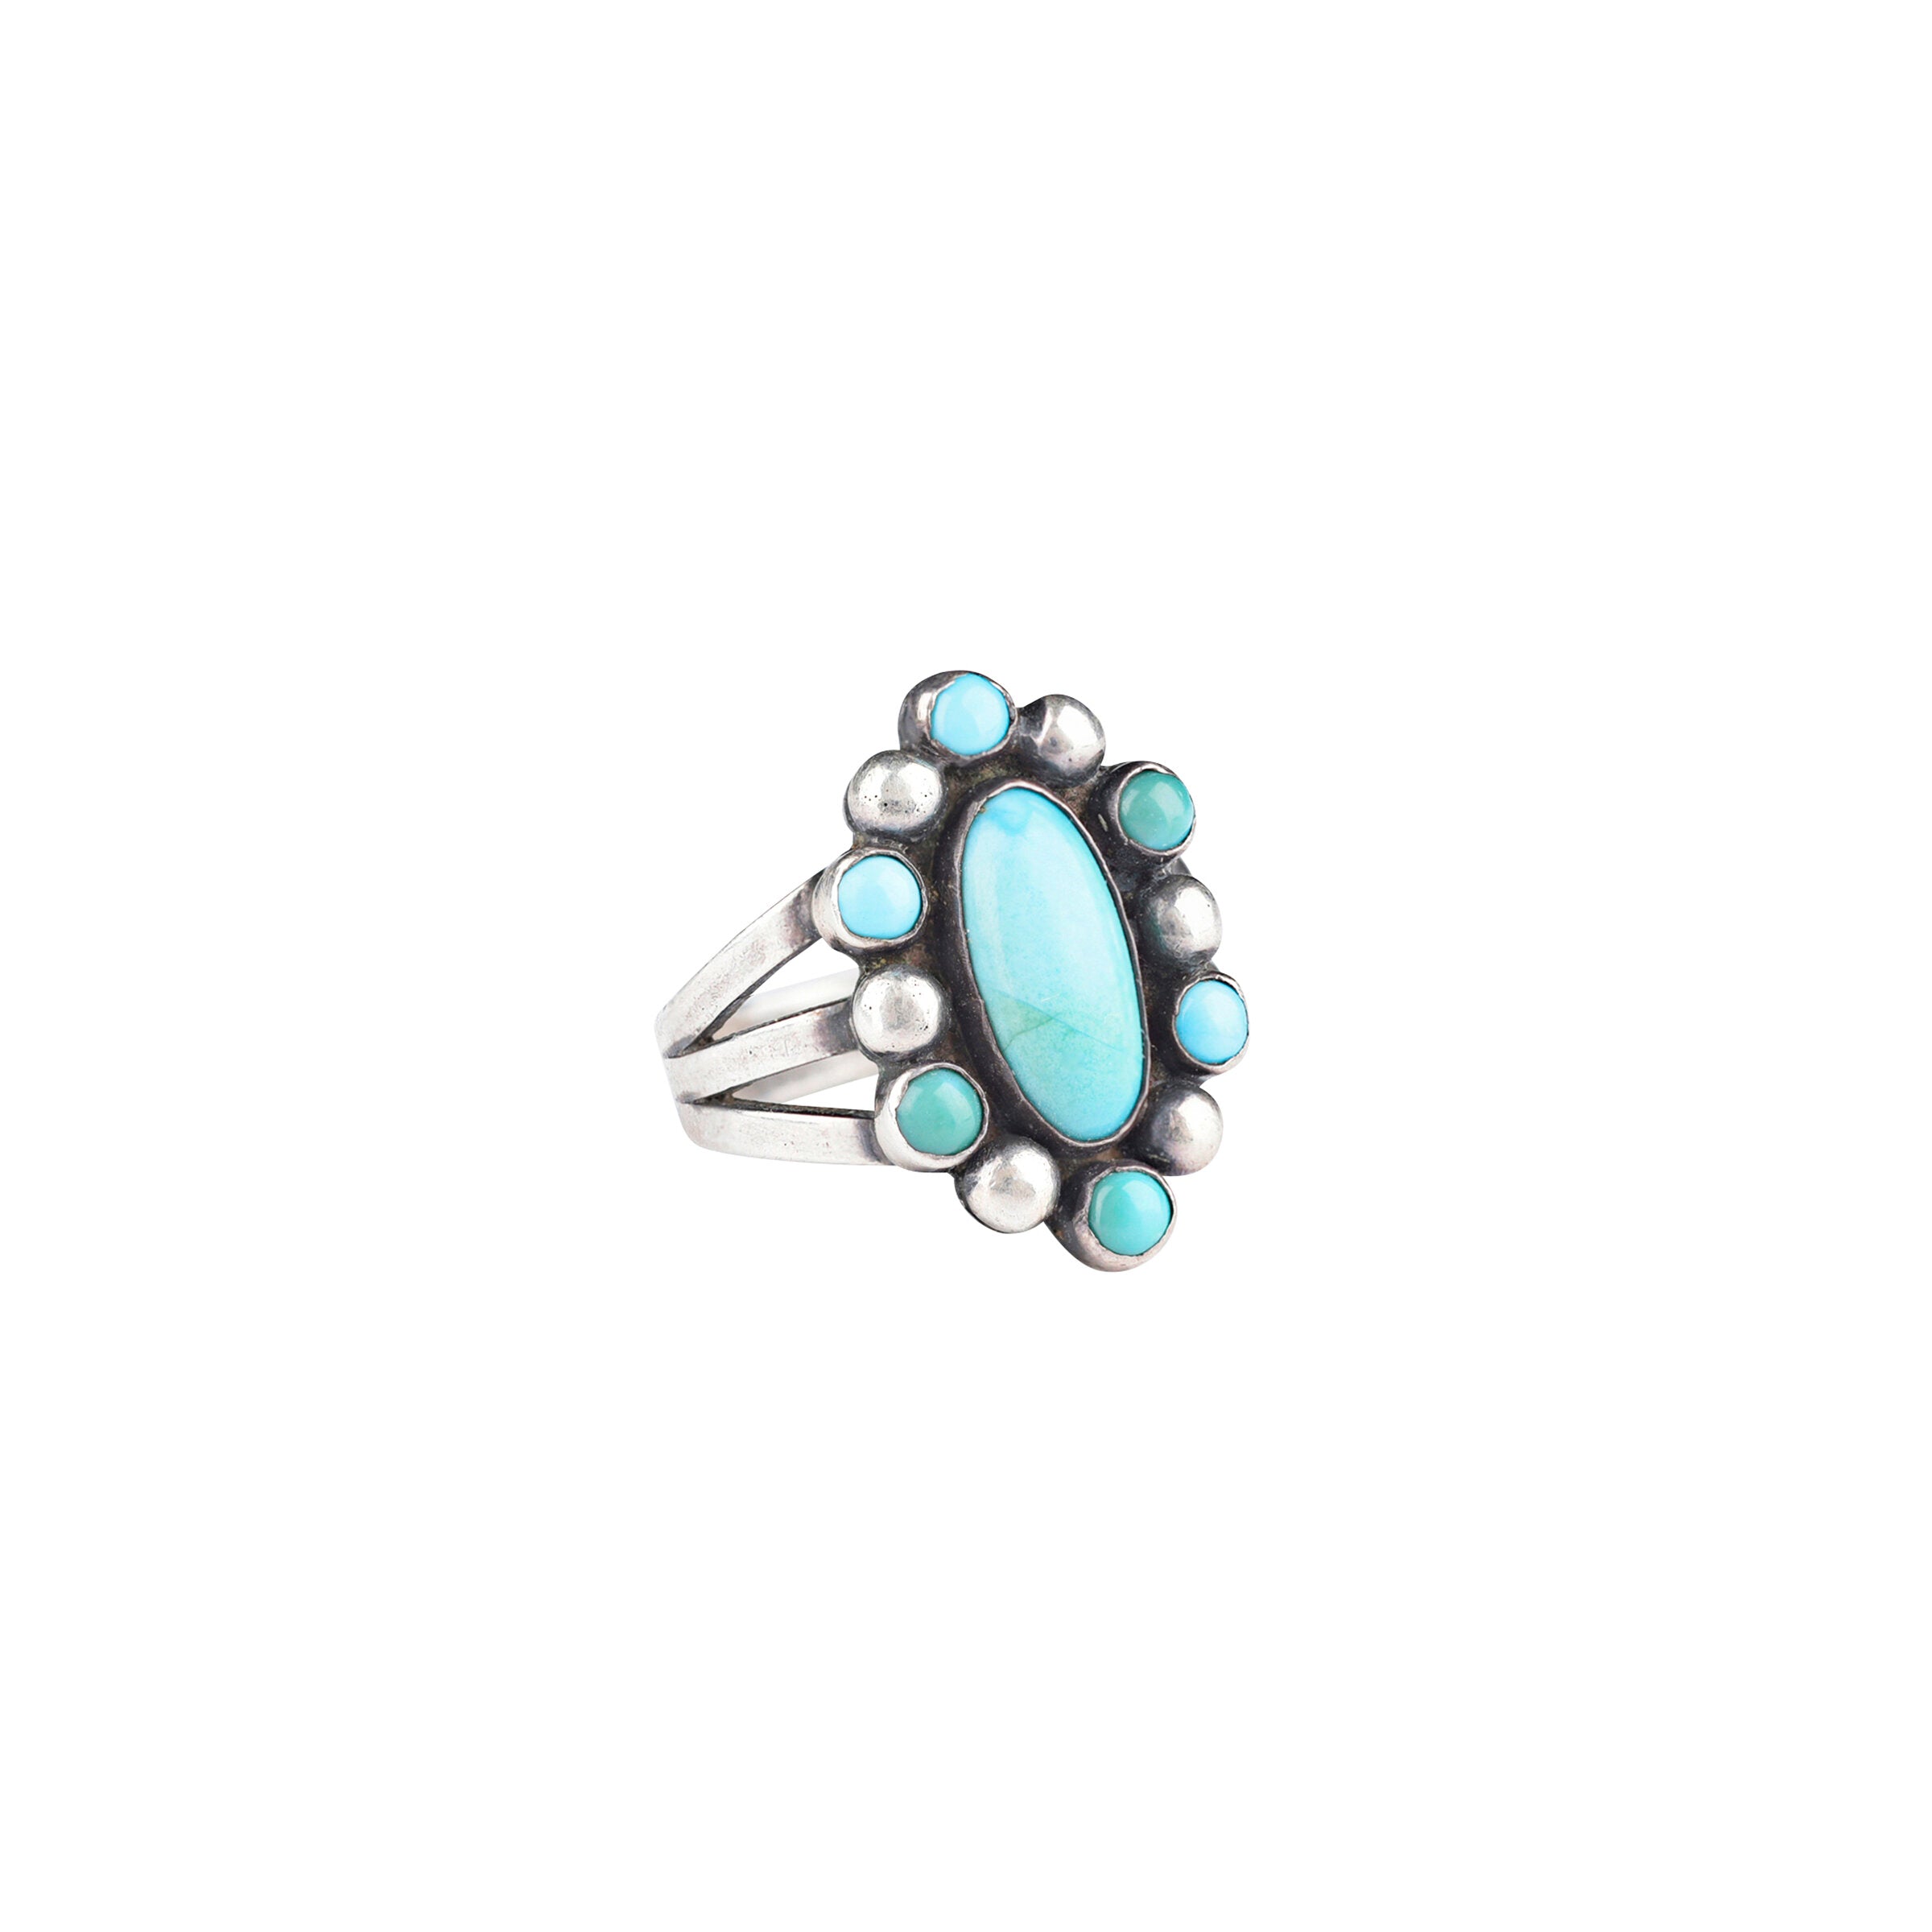 Vintage Navajo Cluster Turquoise Ring, c. 1950's - Size 5 3/4